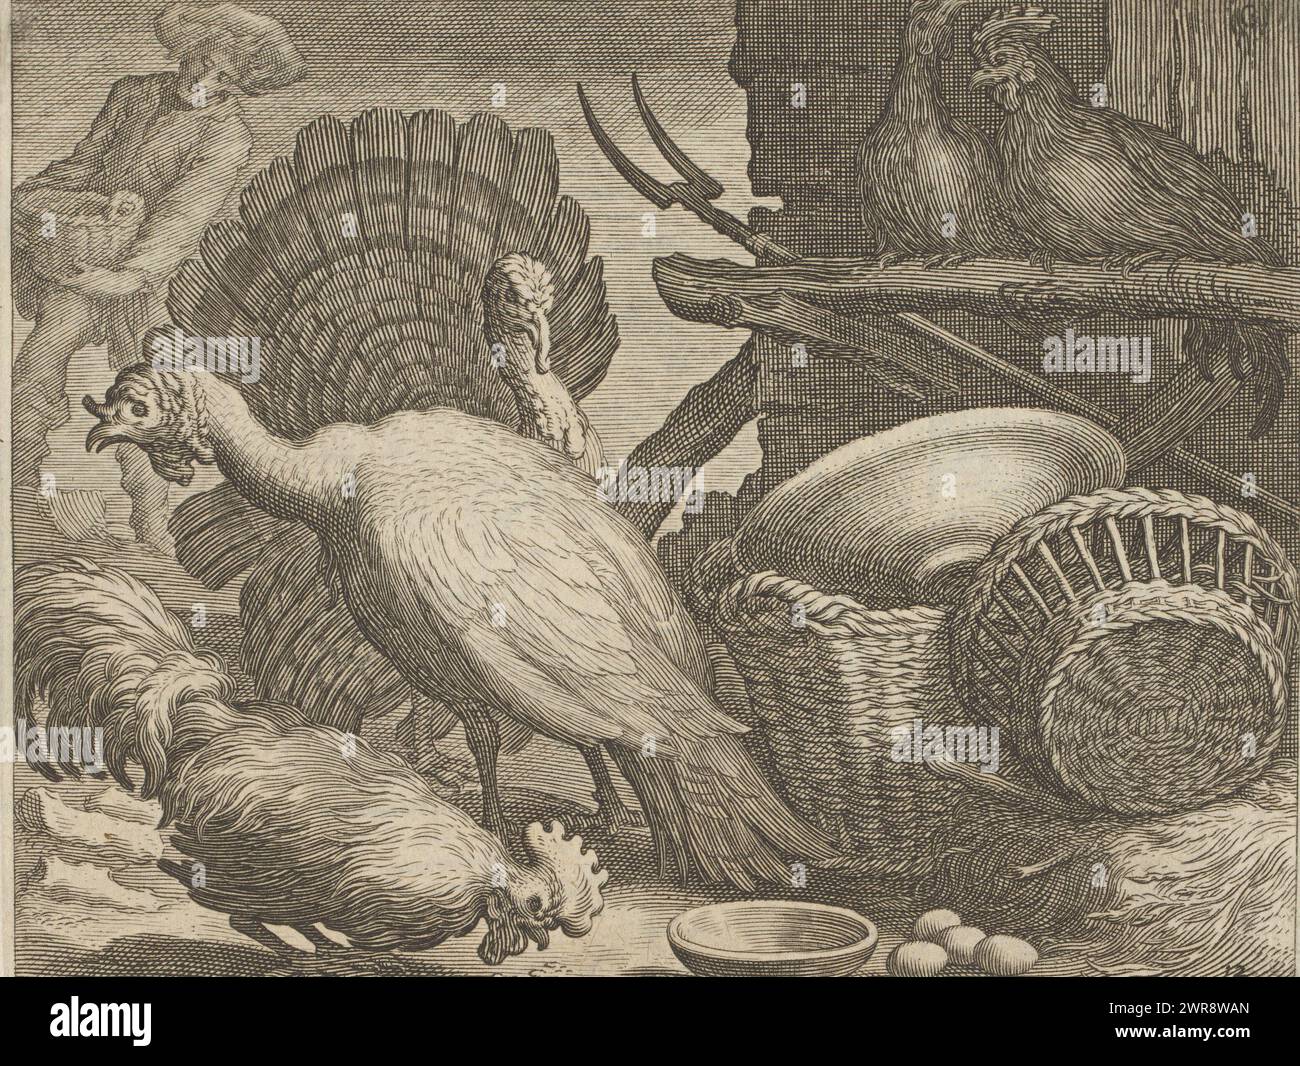 Chickens and turkeys, Pastorals (series title), numbered bottom right: 12., print maker: Boëtius Adamsz. Bolswert, after design by: Abraham Bloemaert, publisher: Wilhelmus Koning, (possibly), Amsterdam, 1611 - 1632 and/or c. 1717 - 1732, paper, engraving, height 112 mm × width 143 mm, print Stock Photo